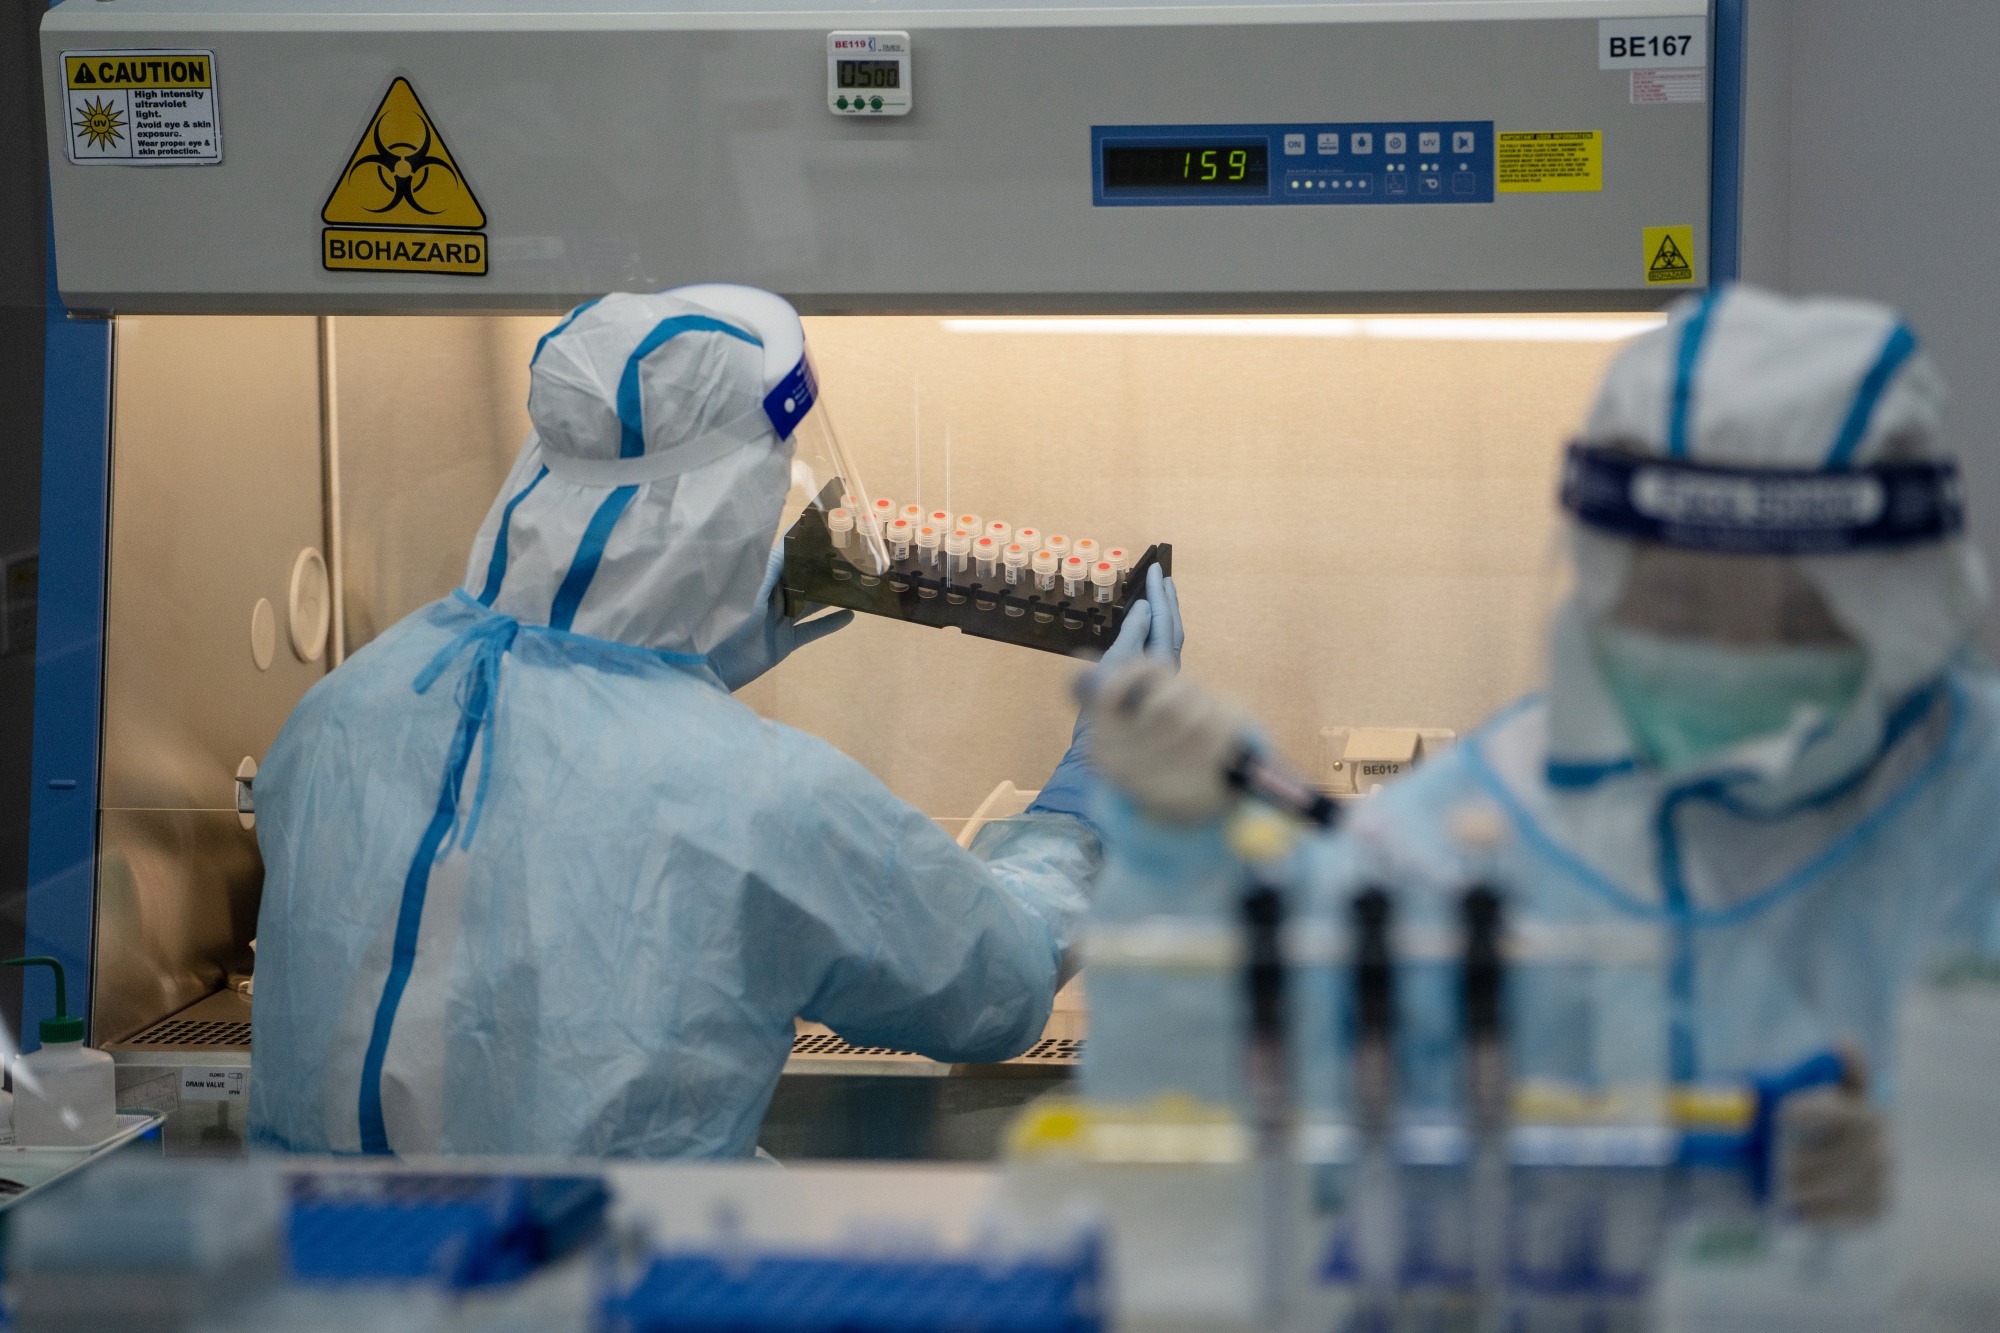 A lab technician wearing a protective suit handles saliva samples for Covid-19 testing at a laboratory in Hong Kong, on July 31.